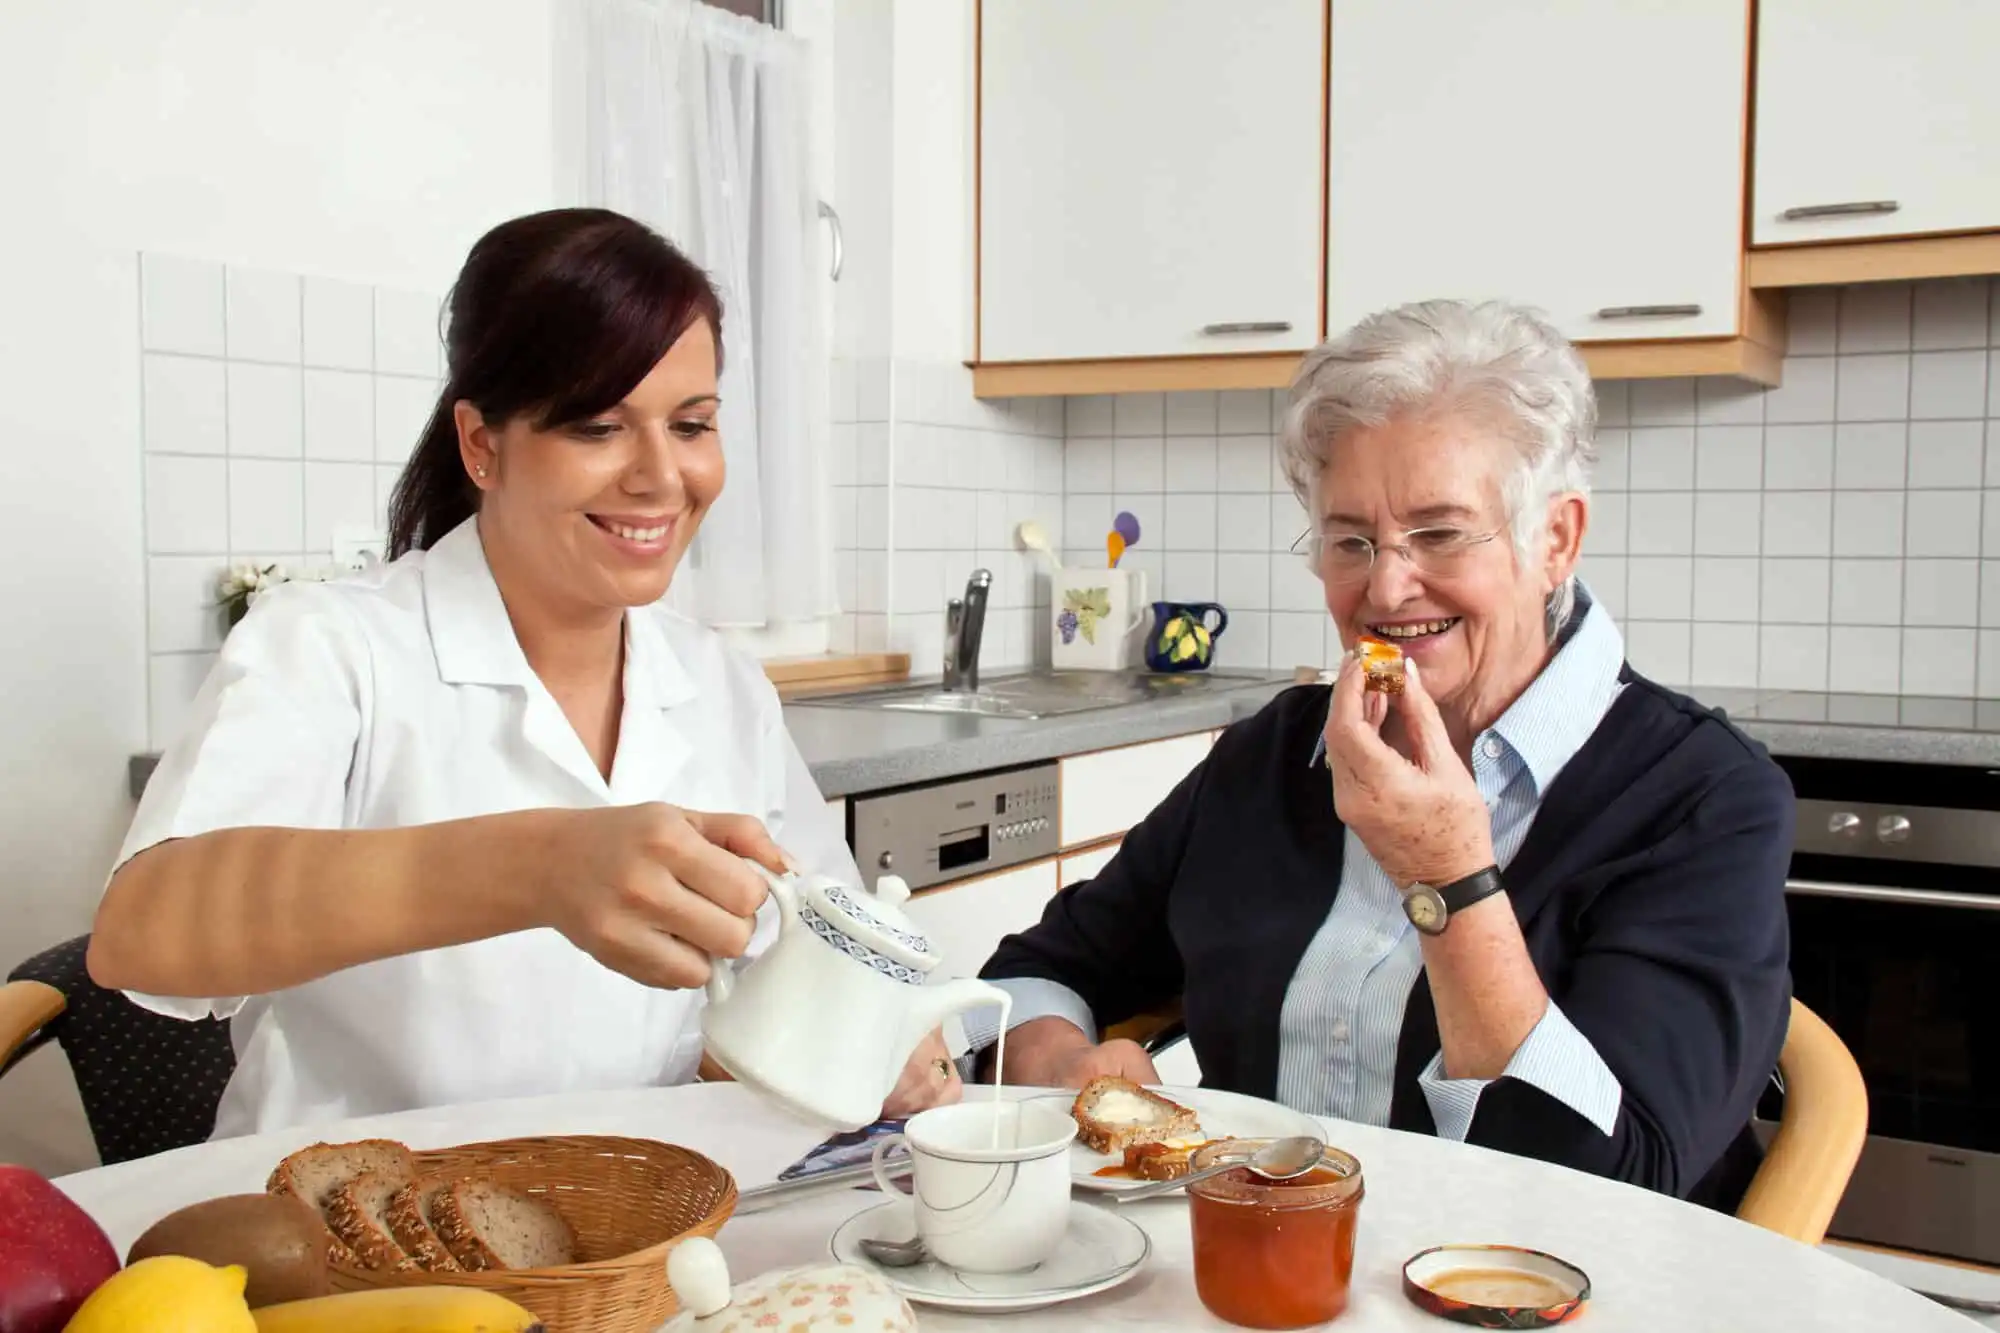 Senior being assisted by a caregiver